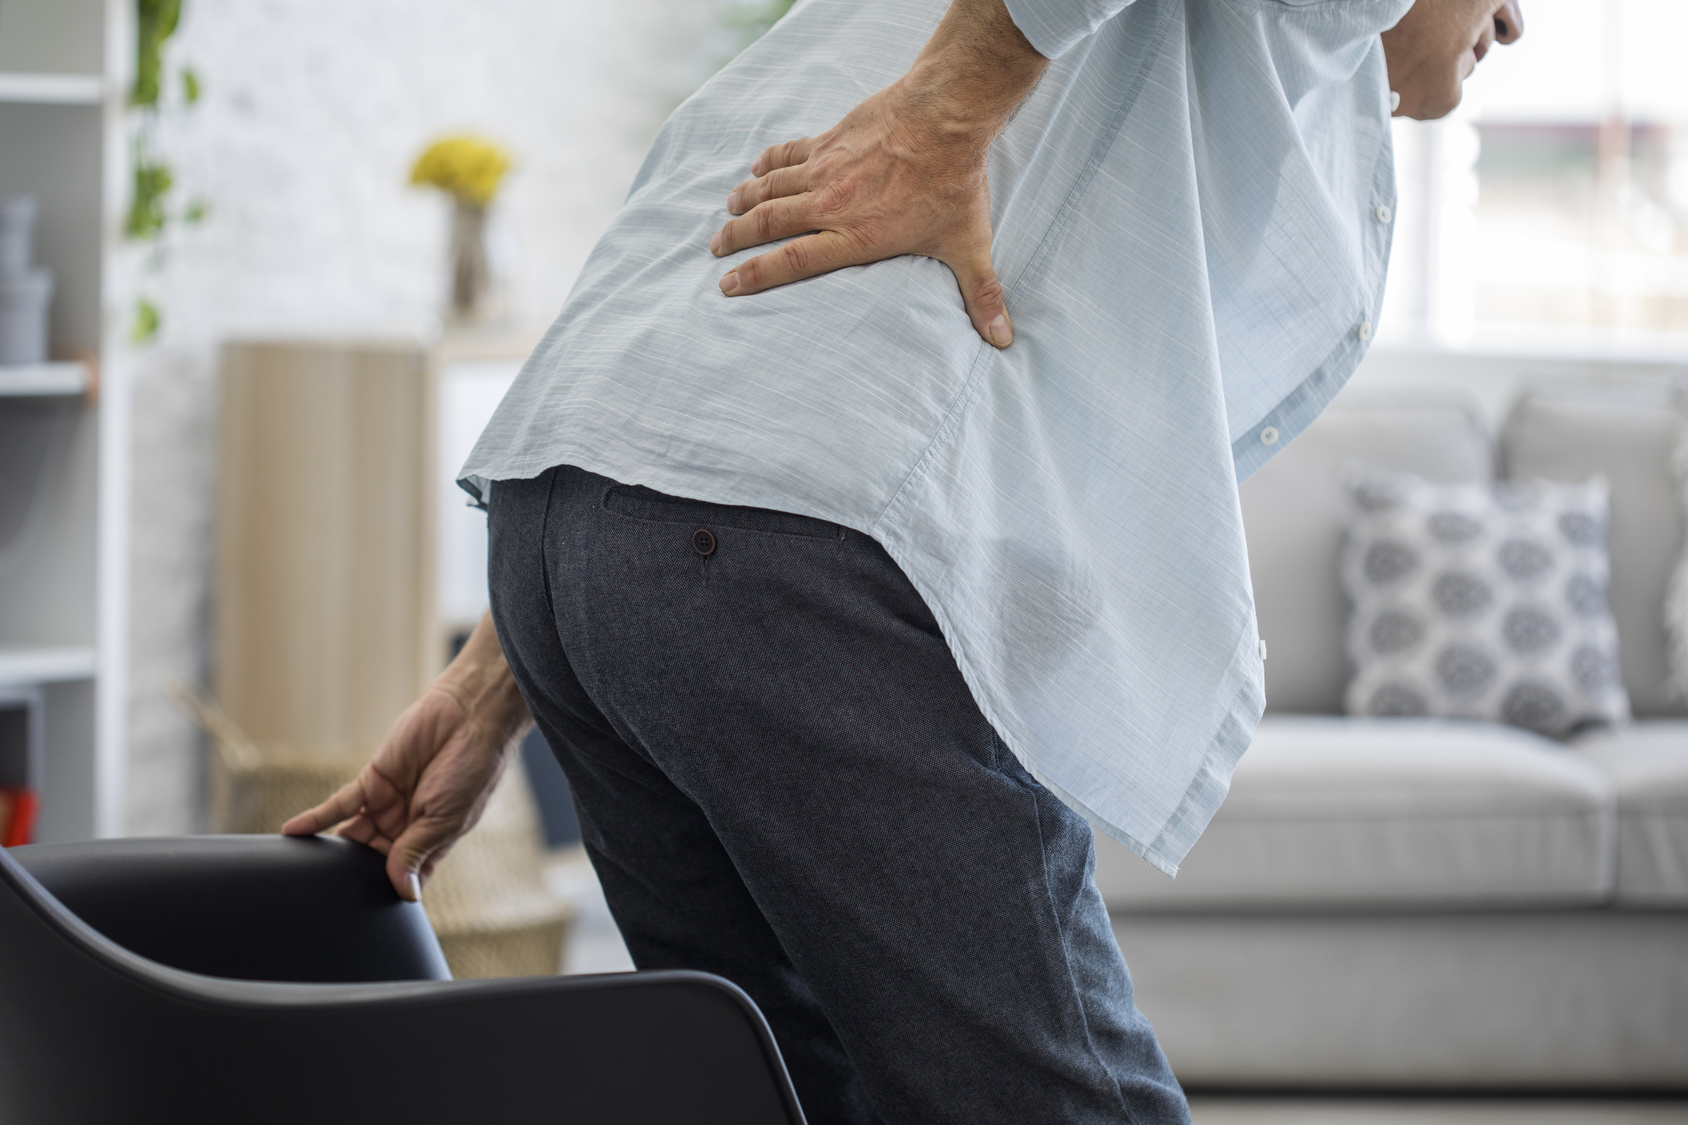 Trying Physical Therapy First For Low Back Pain May Curb Use Of Opioids